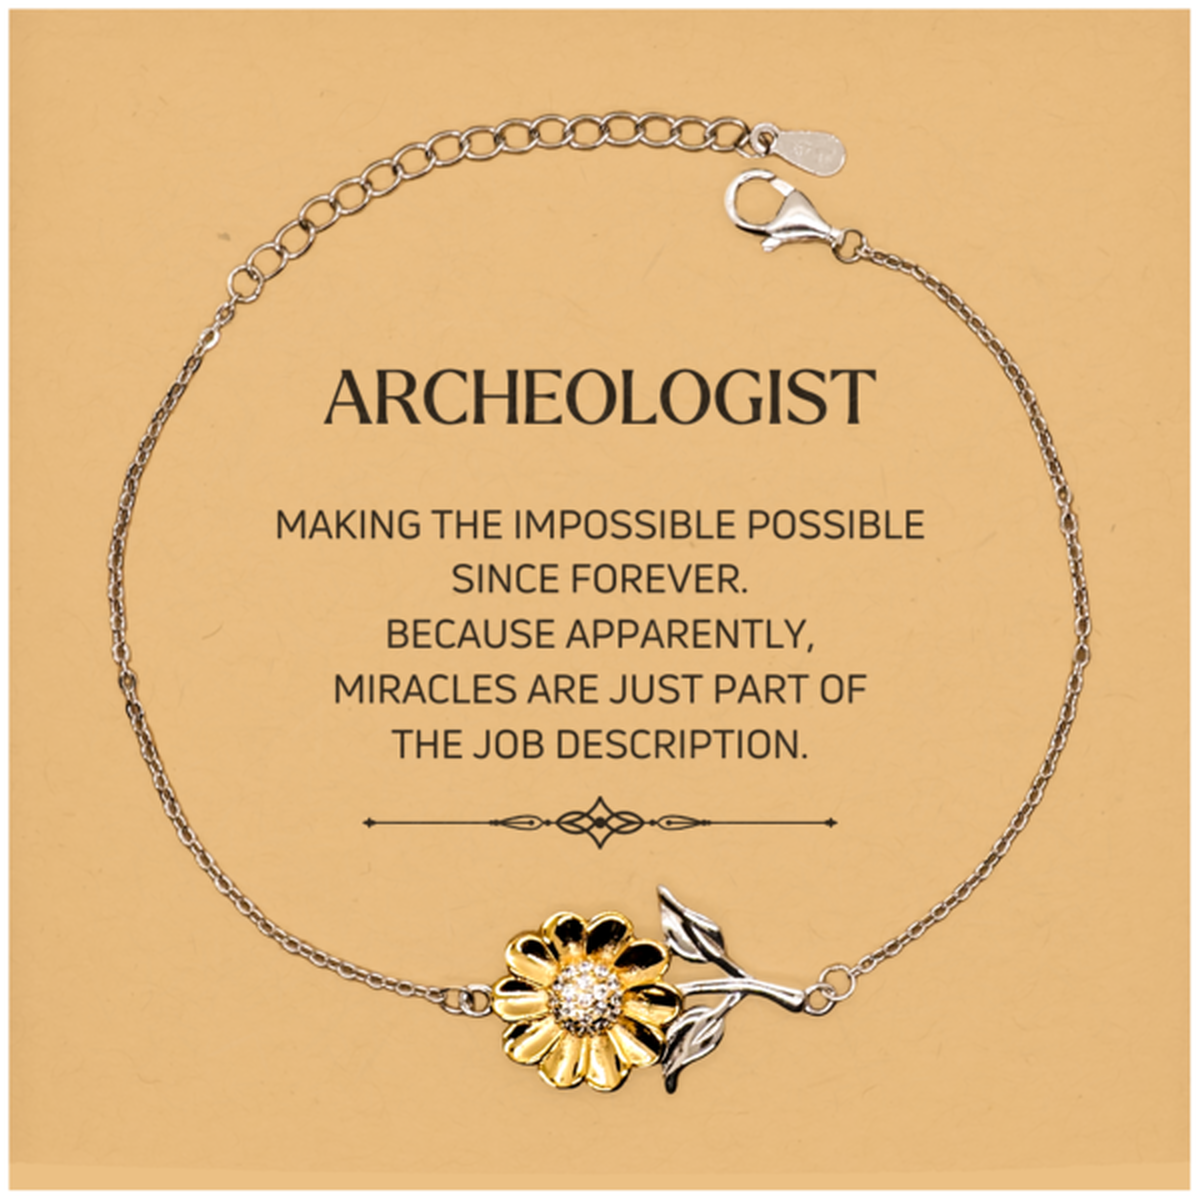 Funny Archeologist Gifts, Miracles are just part of the job description, Inspirational Birthday Christmas Sunflower Bracelet For Archeologist, Men, Women, Coworkers, Friends, Boss